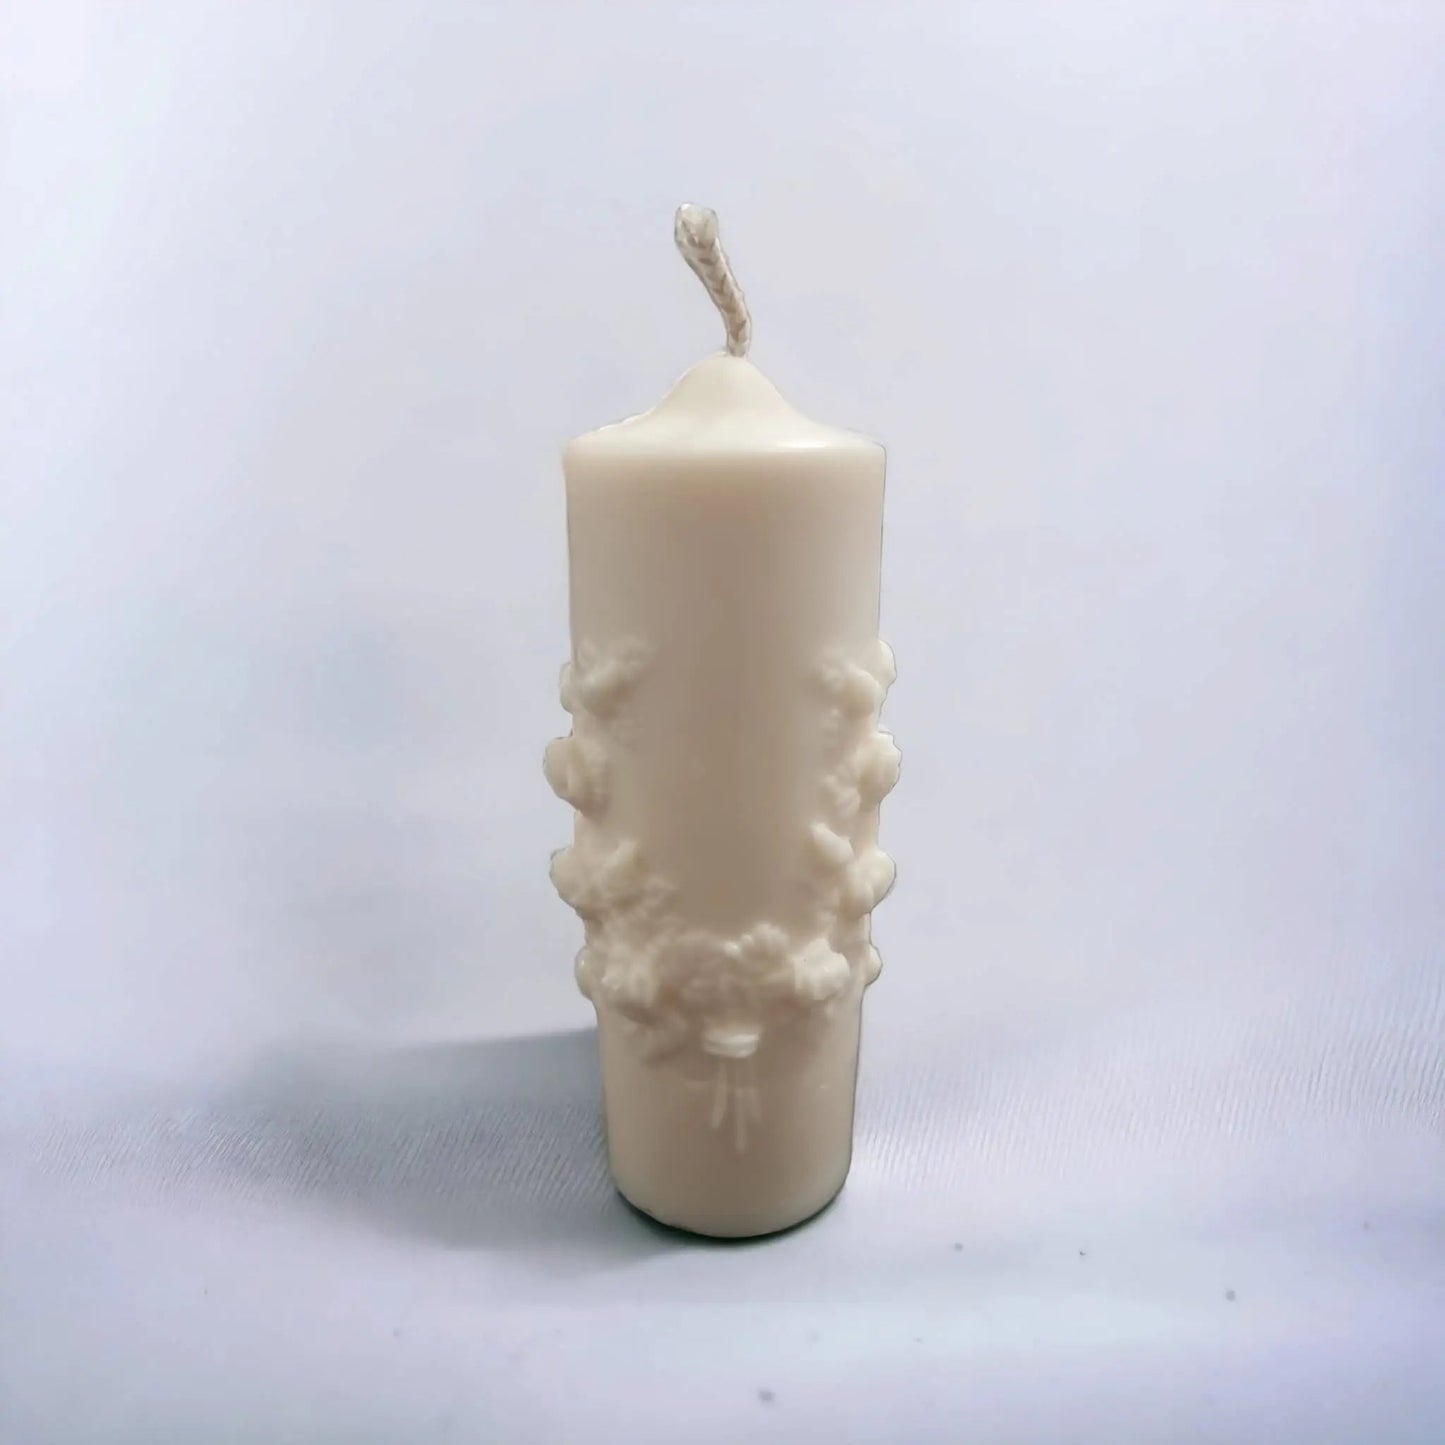 Rosemary & Bay Wreath Scented Pillar Candle with Rose Design - Auras Workshop  -  Mold Craft Candles -   - Cyprus & Greece - Wholesale - Retail #